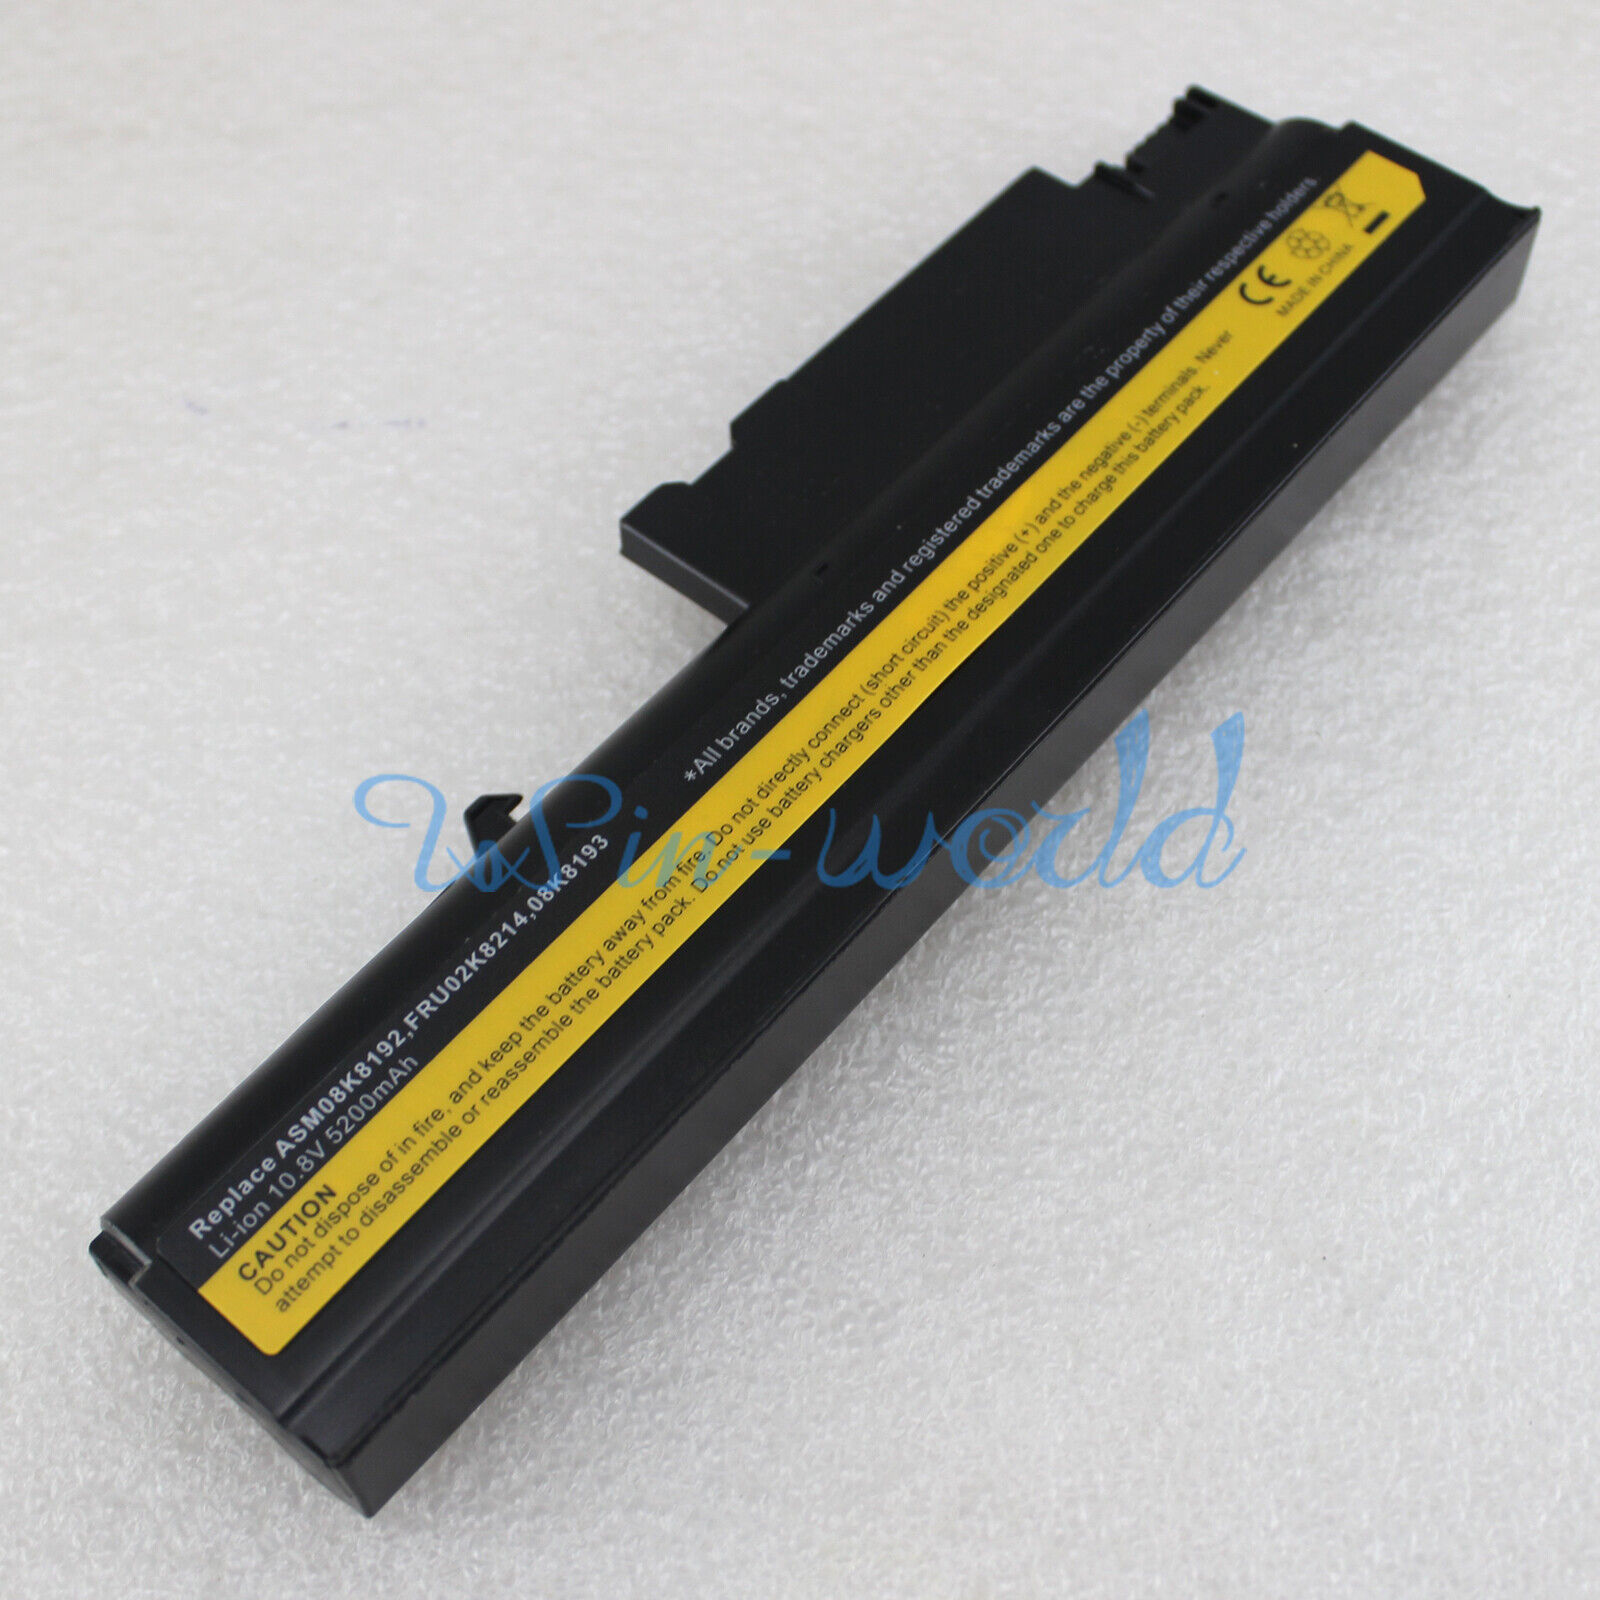 6Cell NEW Laptop Battery For IBM Thinkpad T40 T41 T42 T42P T43 R50